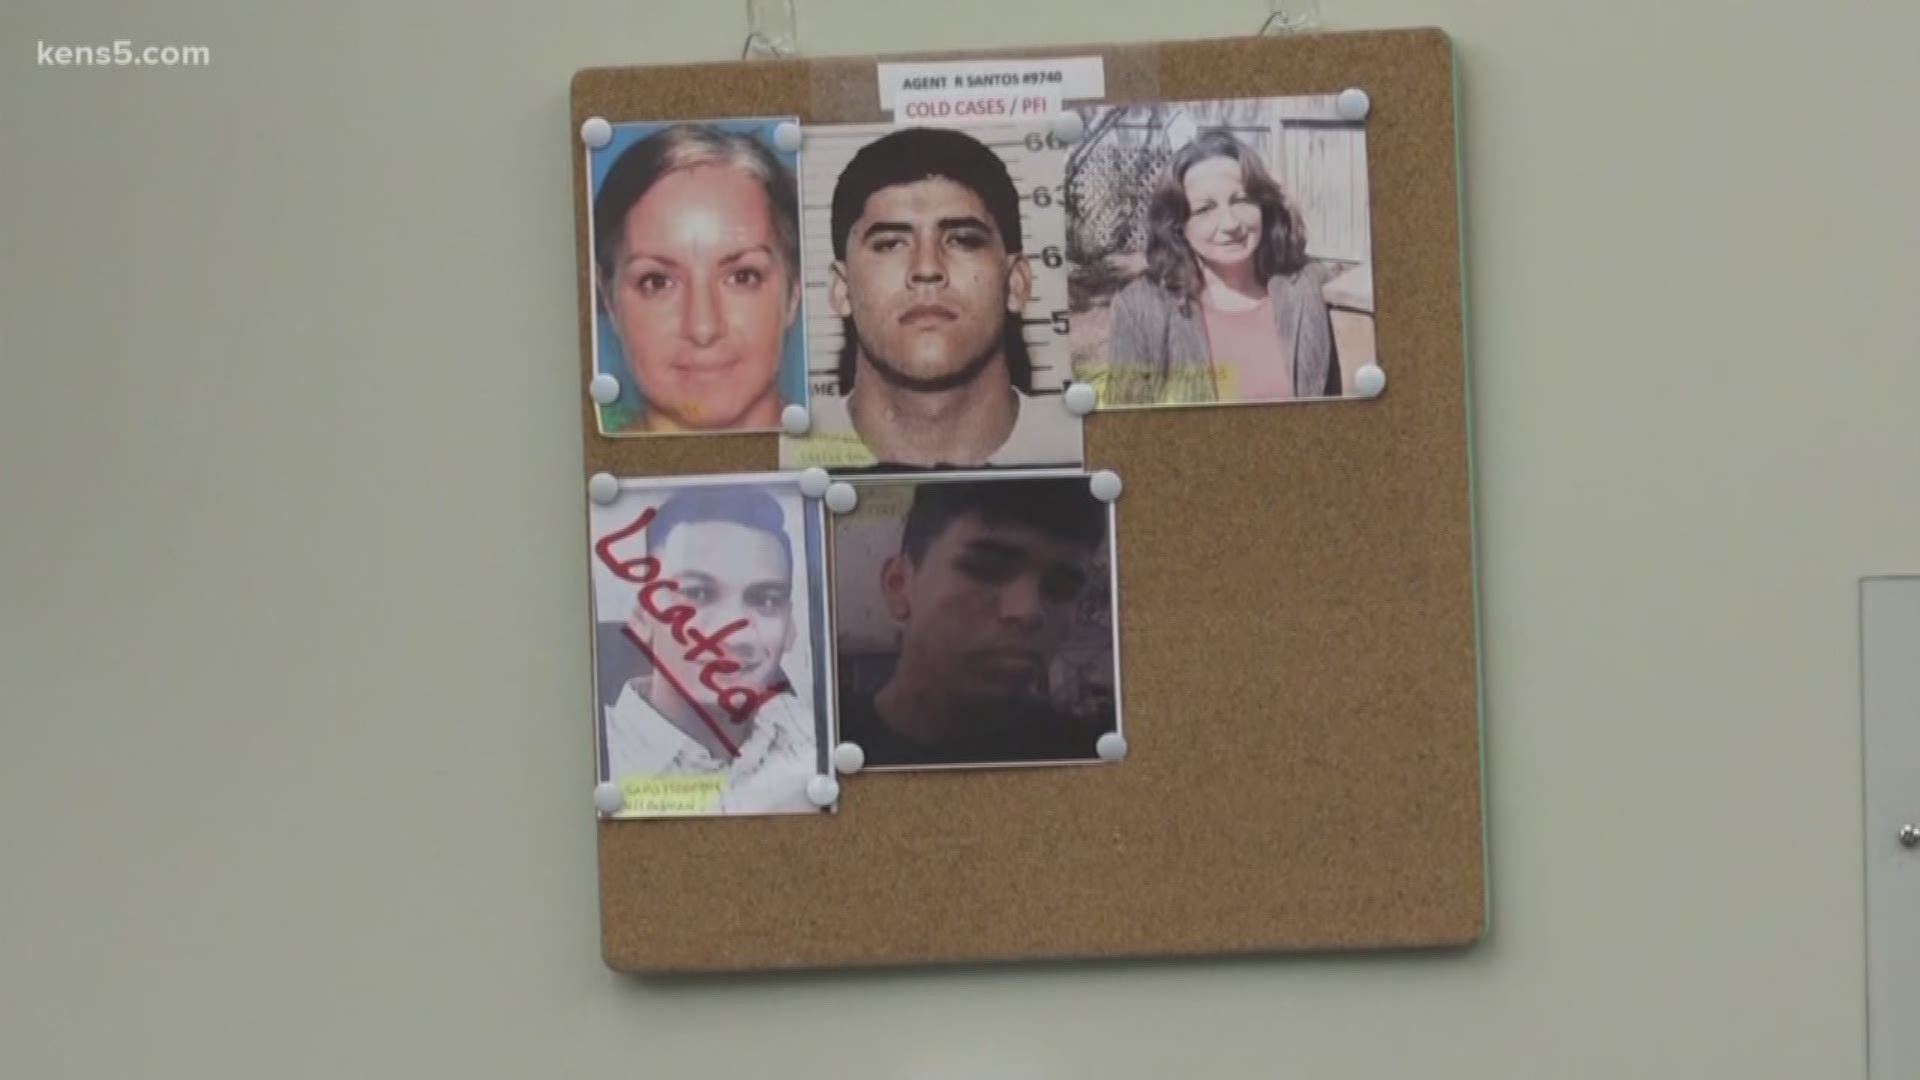 KENS 5 got an inside look at the fight to bring home dozens of missing kids.